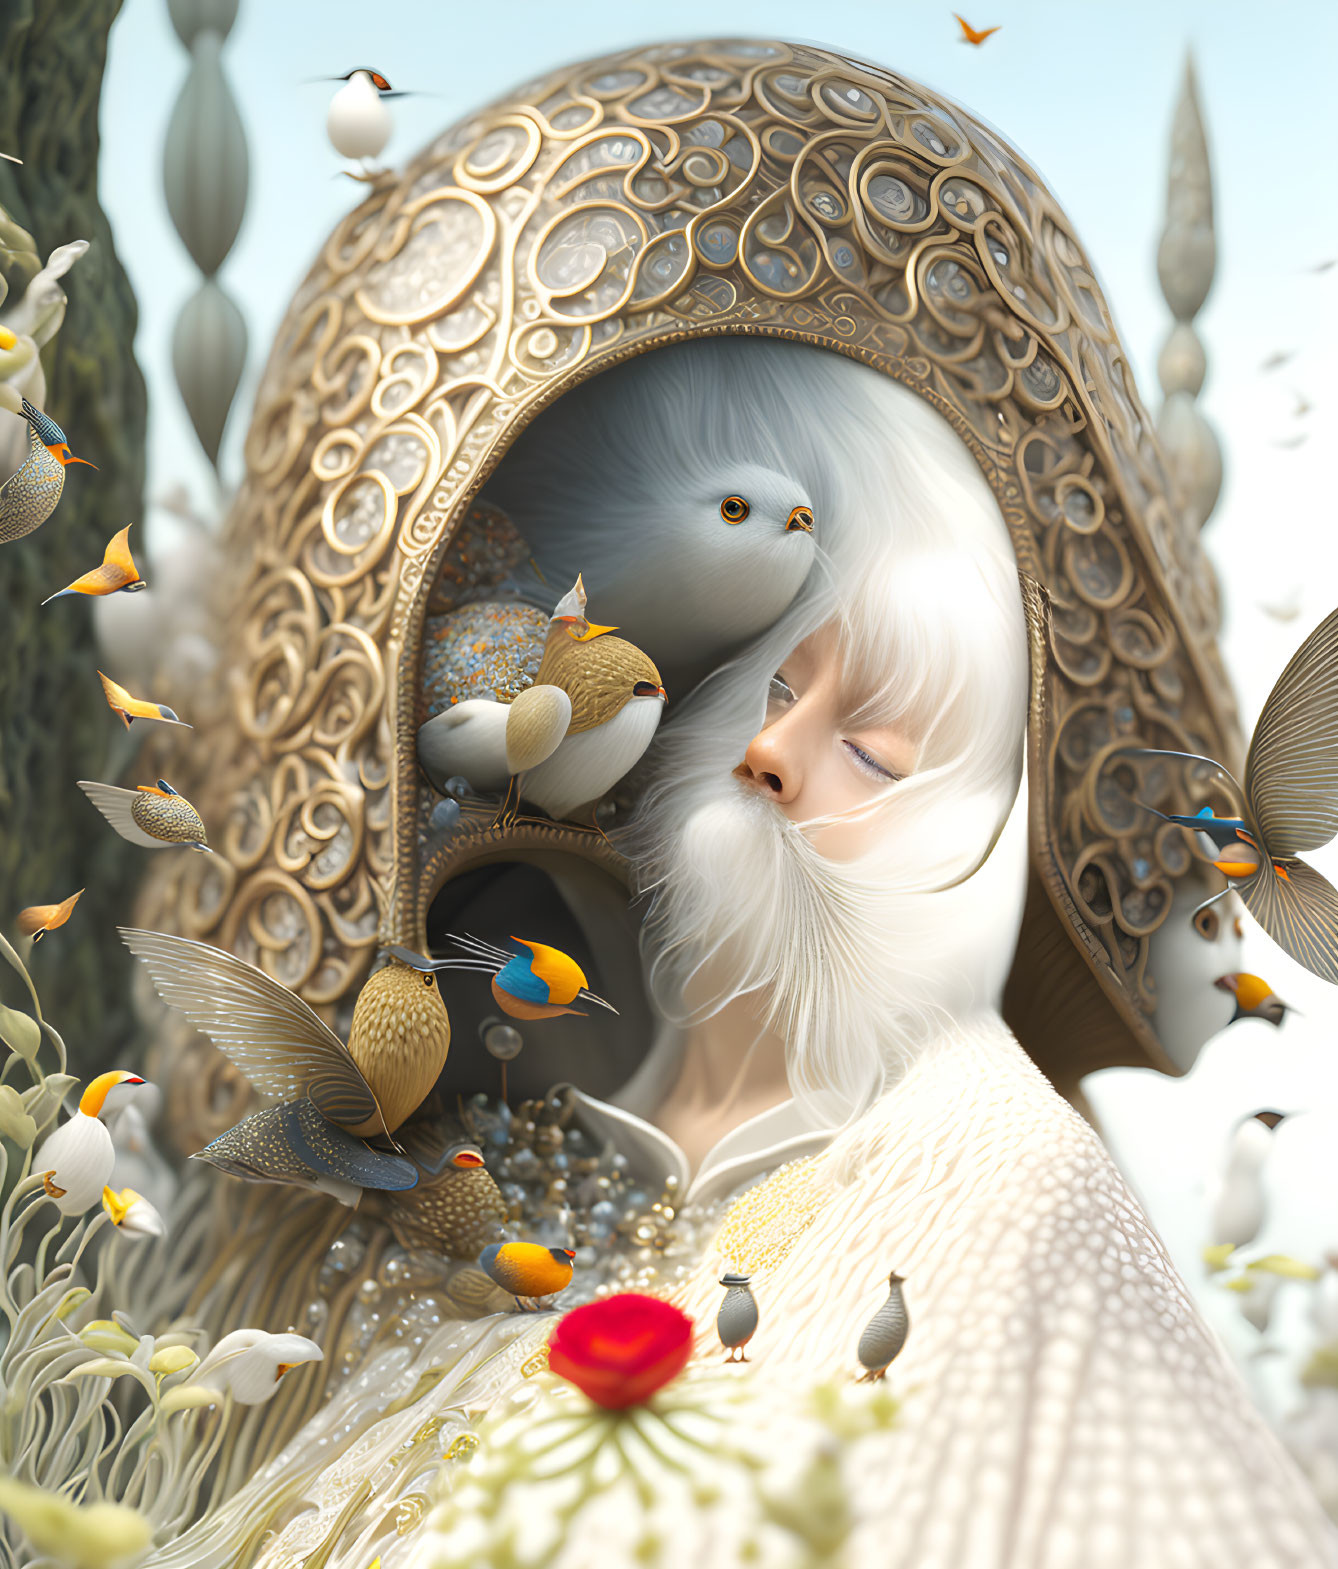 Ethereal figure with whimsical helmet surrounded by flying birds in serene, floral scene